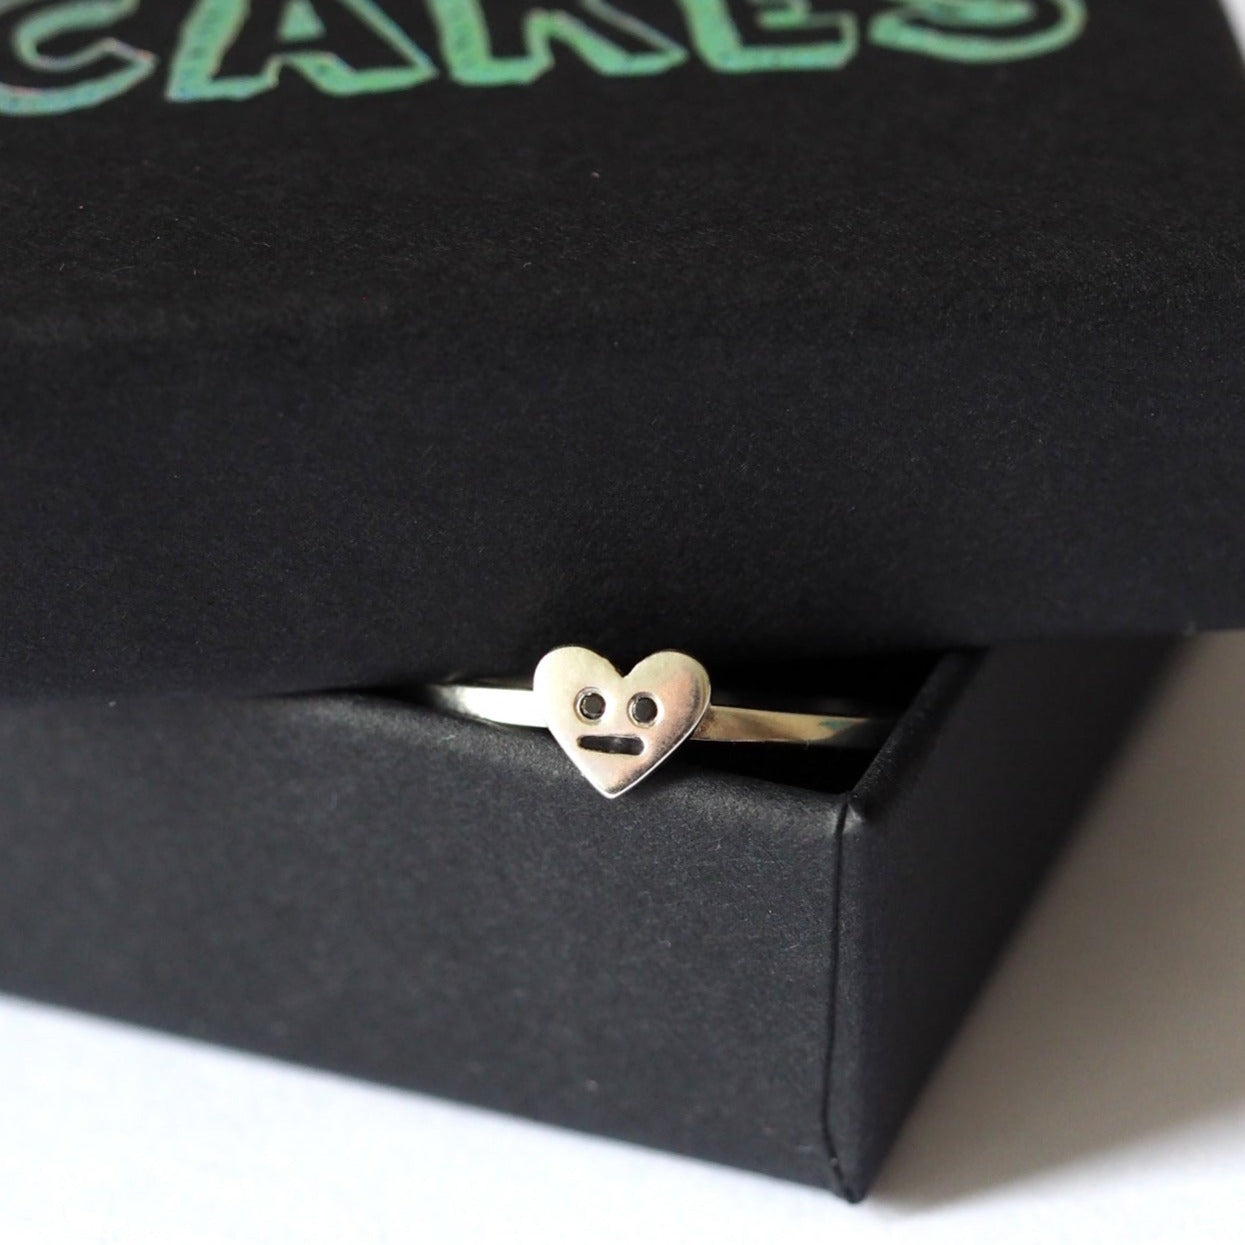 Dinky Heart Ring